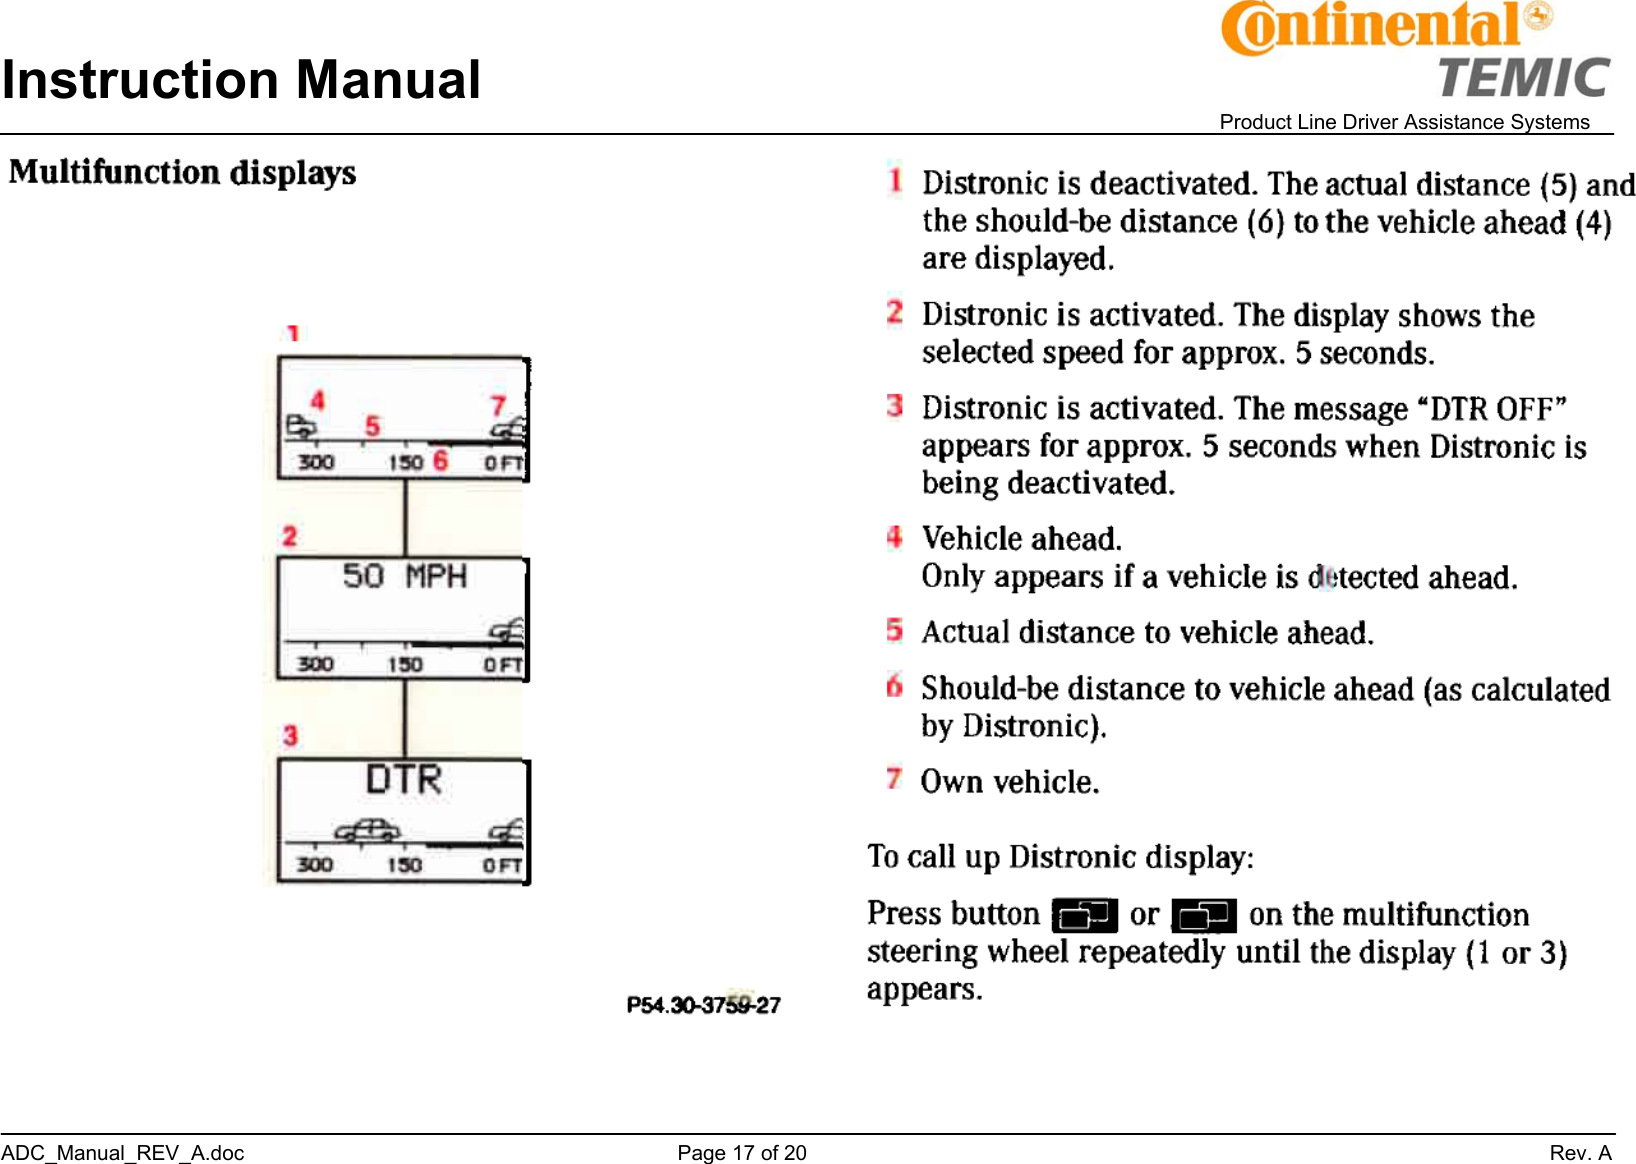 Instruction Manual    Product Line Driver Assistance Systems ADC_Manual_REV_A.doc     Page 17 of 20                 Rev. A   